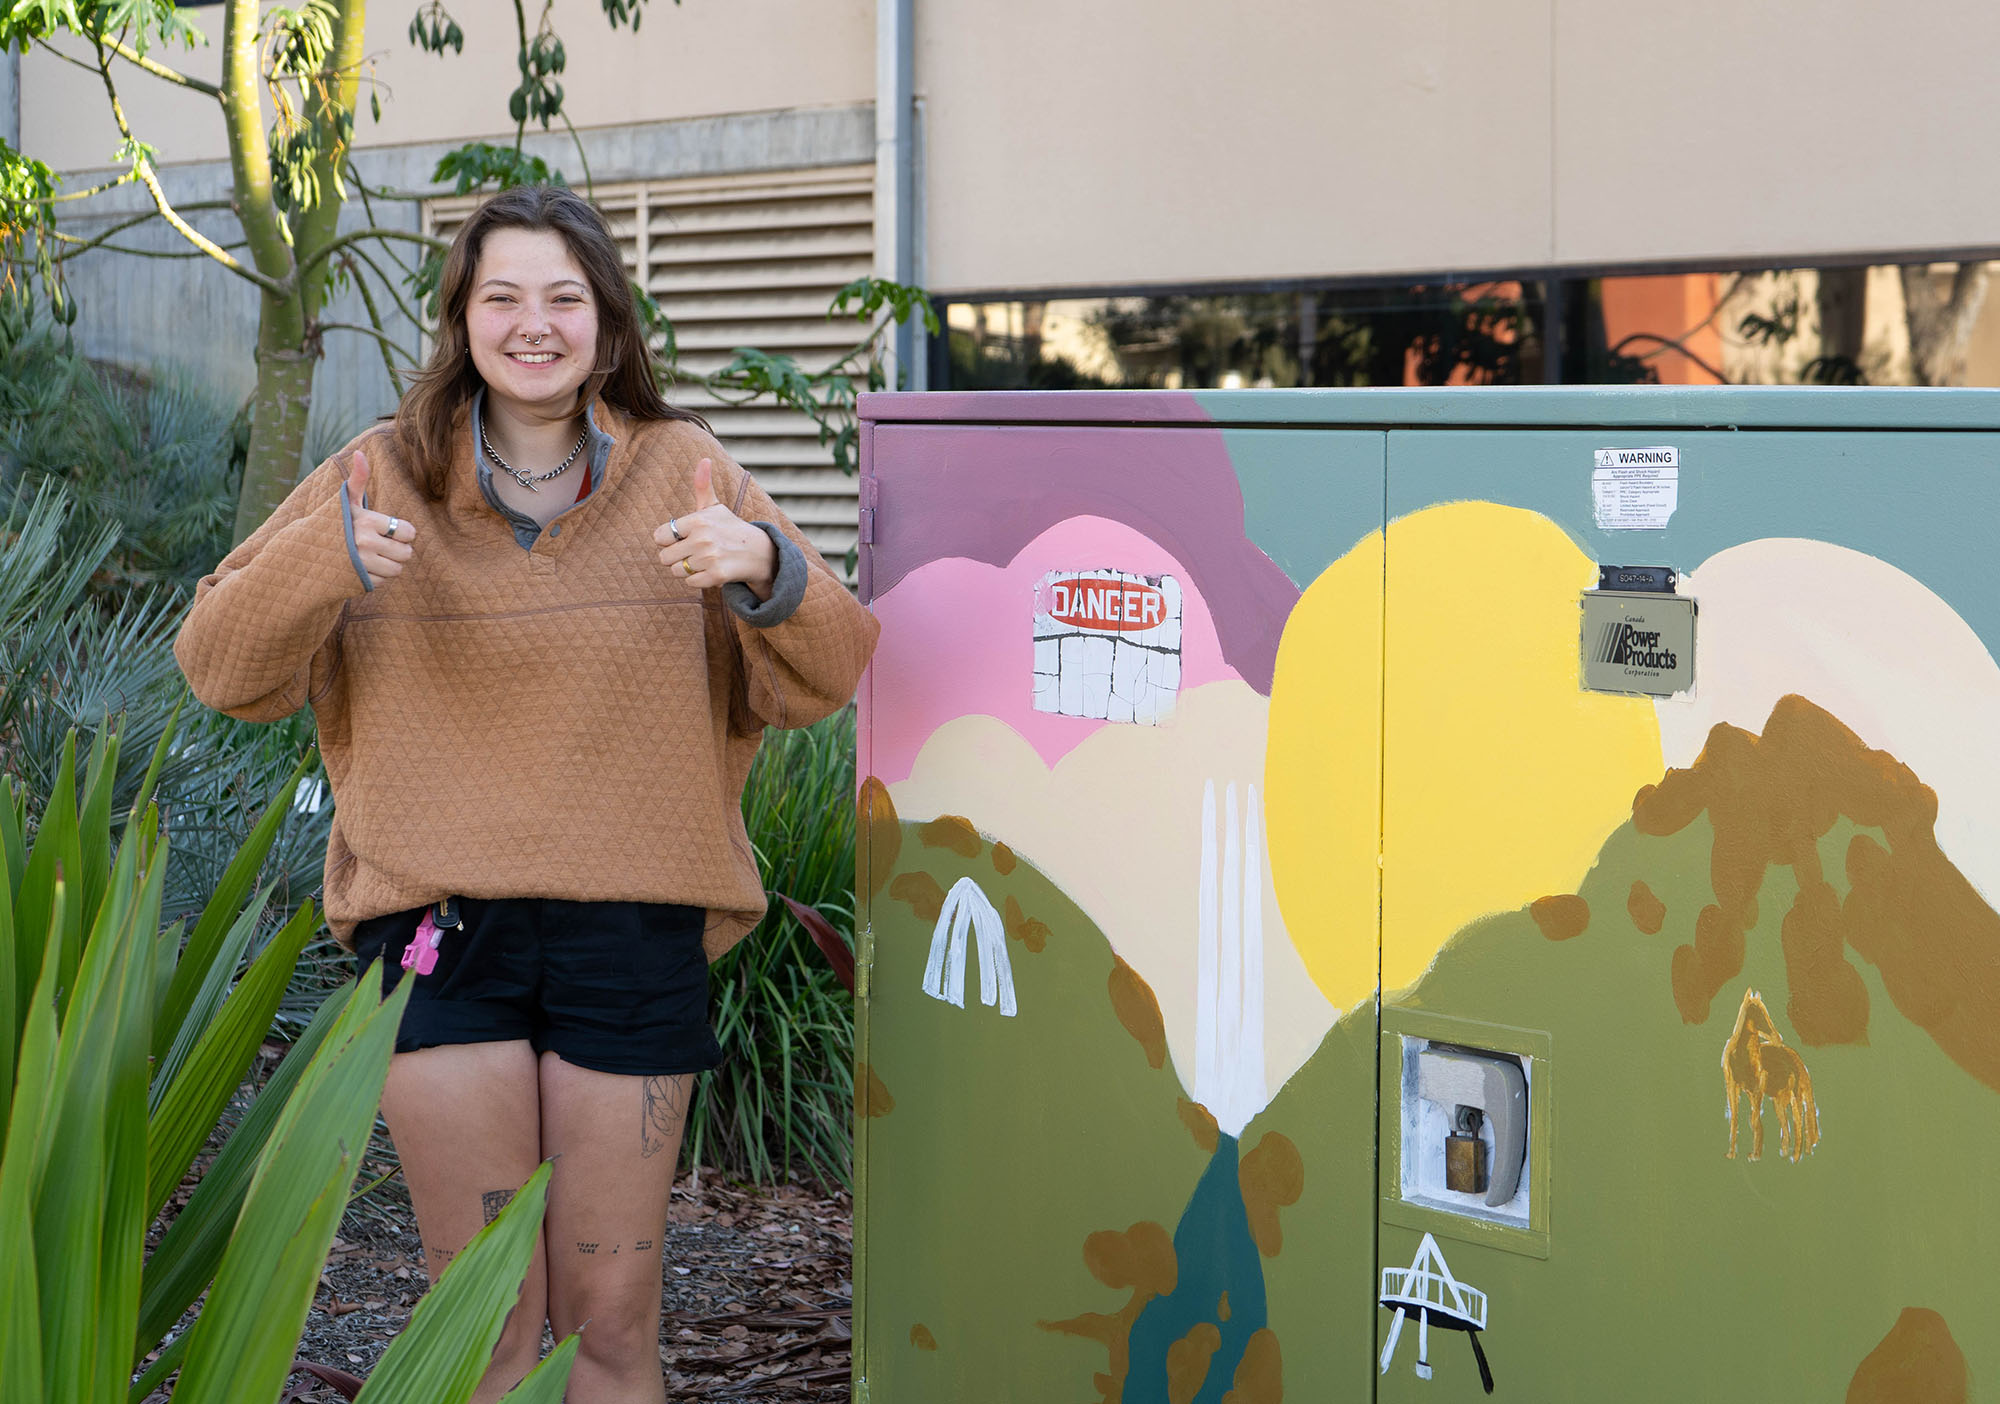 Girl give two thumbs up, standing next to the utility box